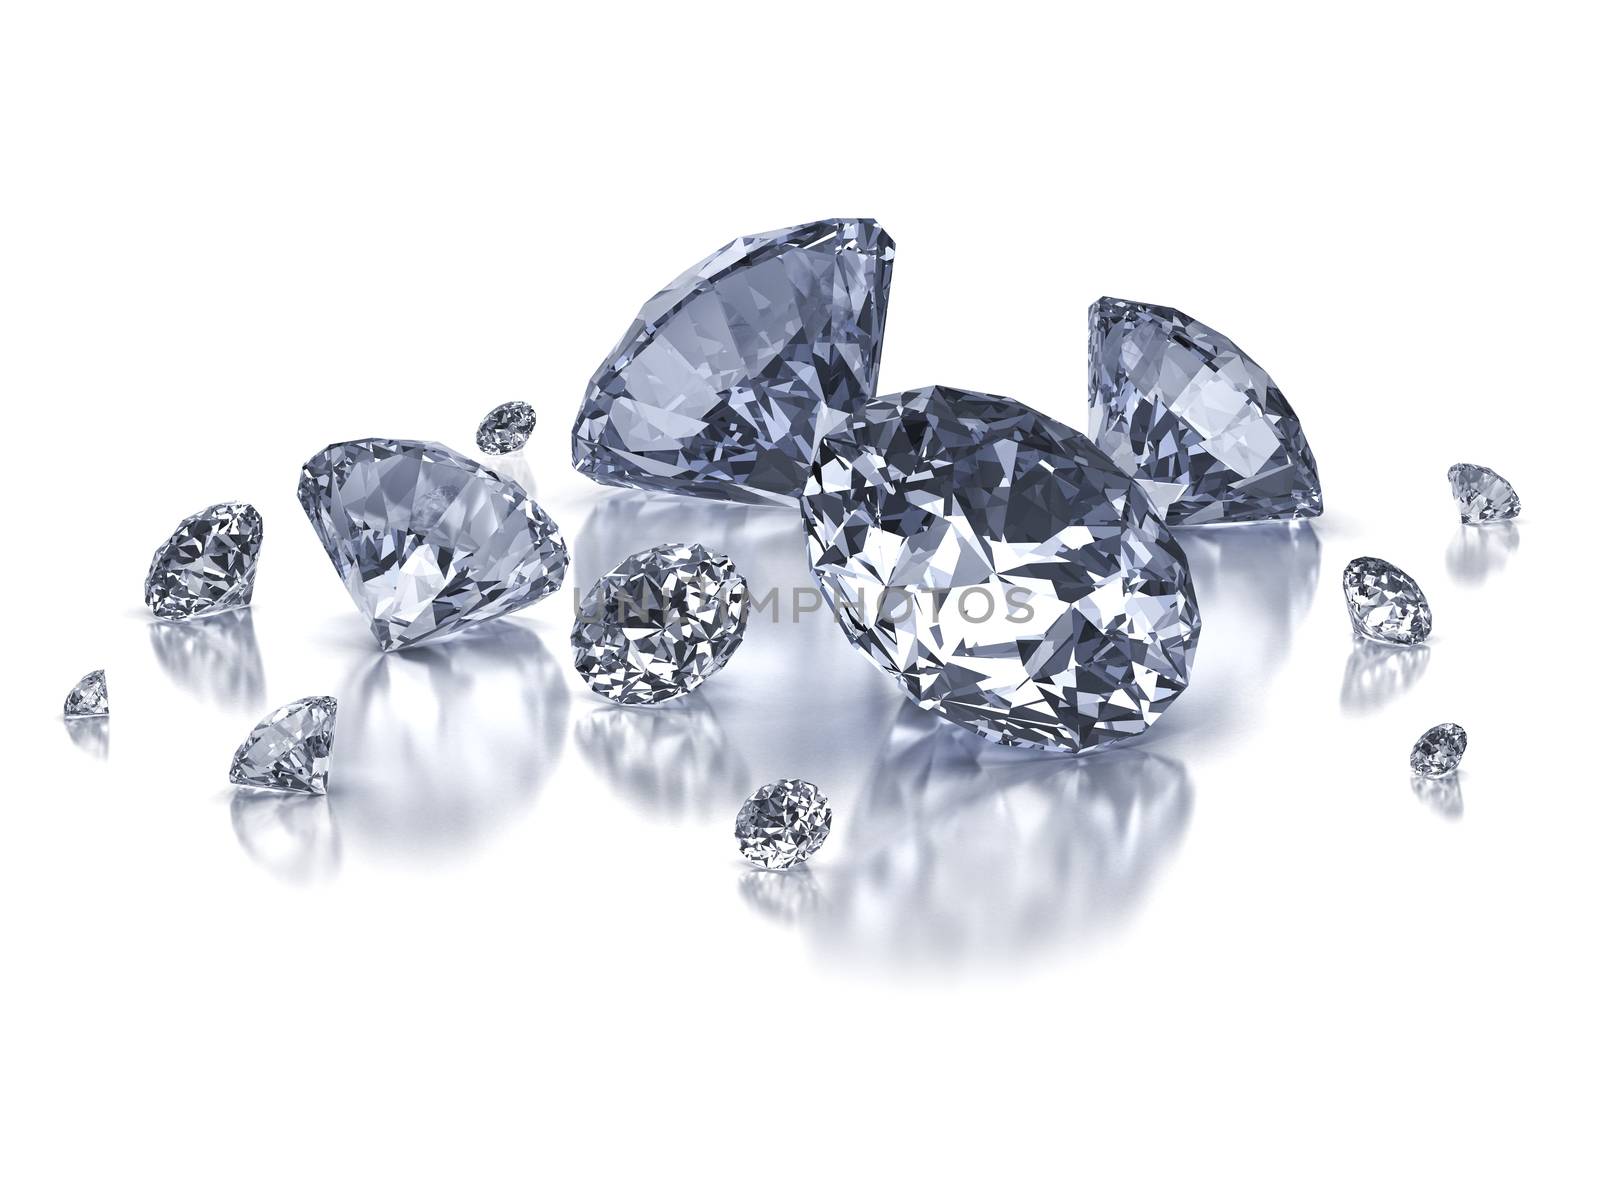 Diamond composition on white background isolated with clipping path